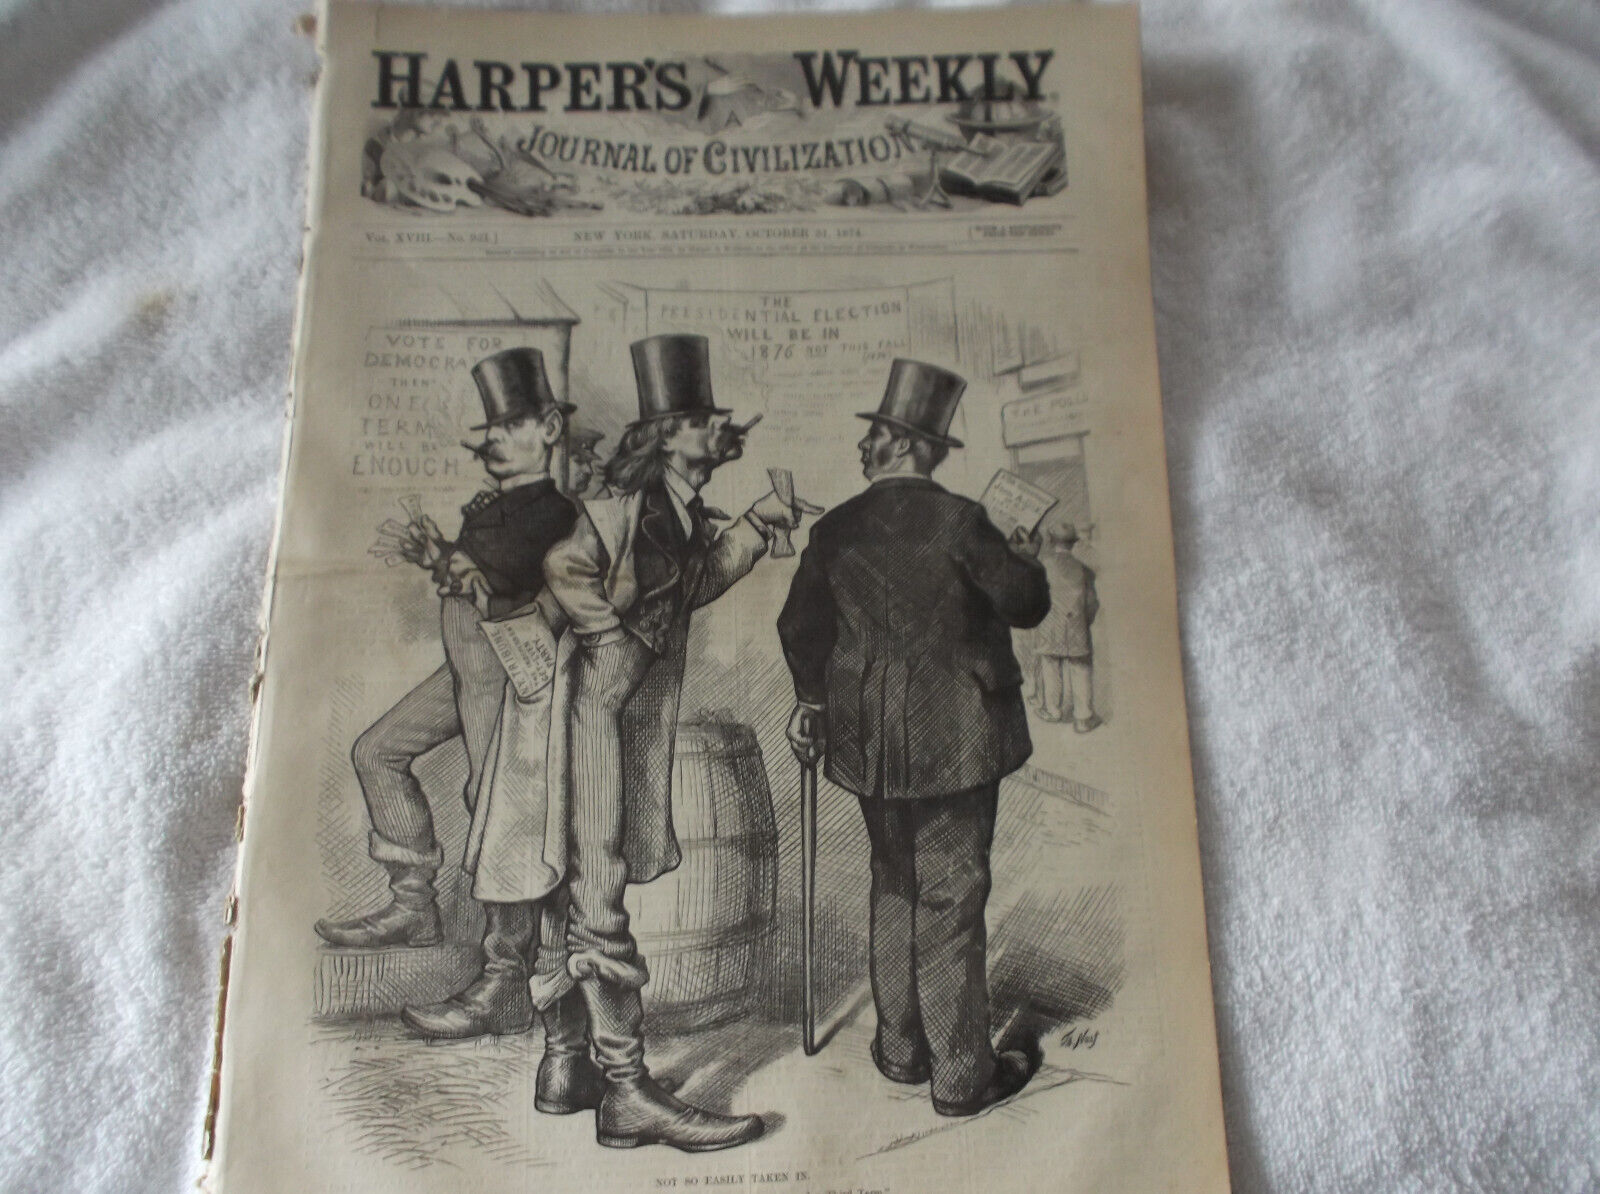   HARPER'S WEEKLY-OCTOBER 1874-  THOMAS NAST POLITICAL COVER-GREAT PRINTS & ADS